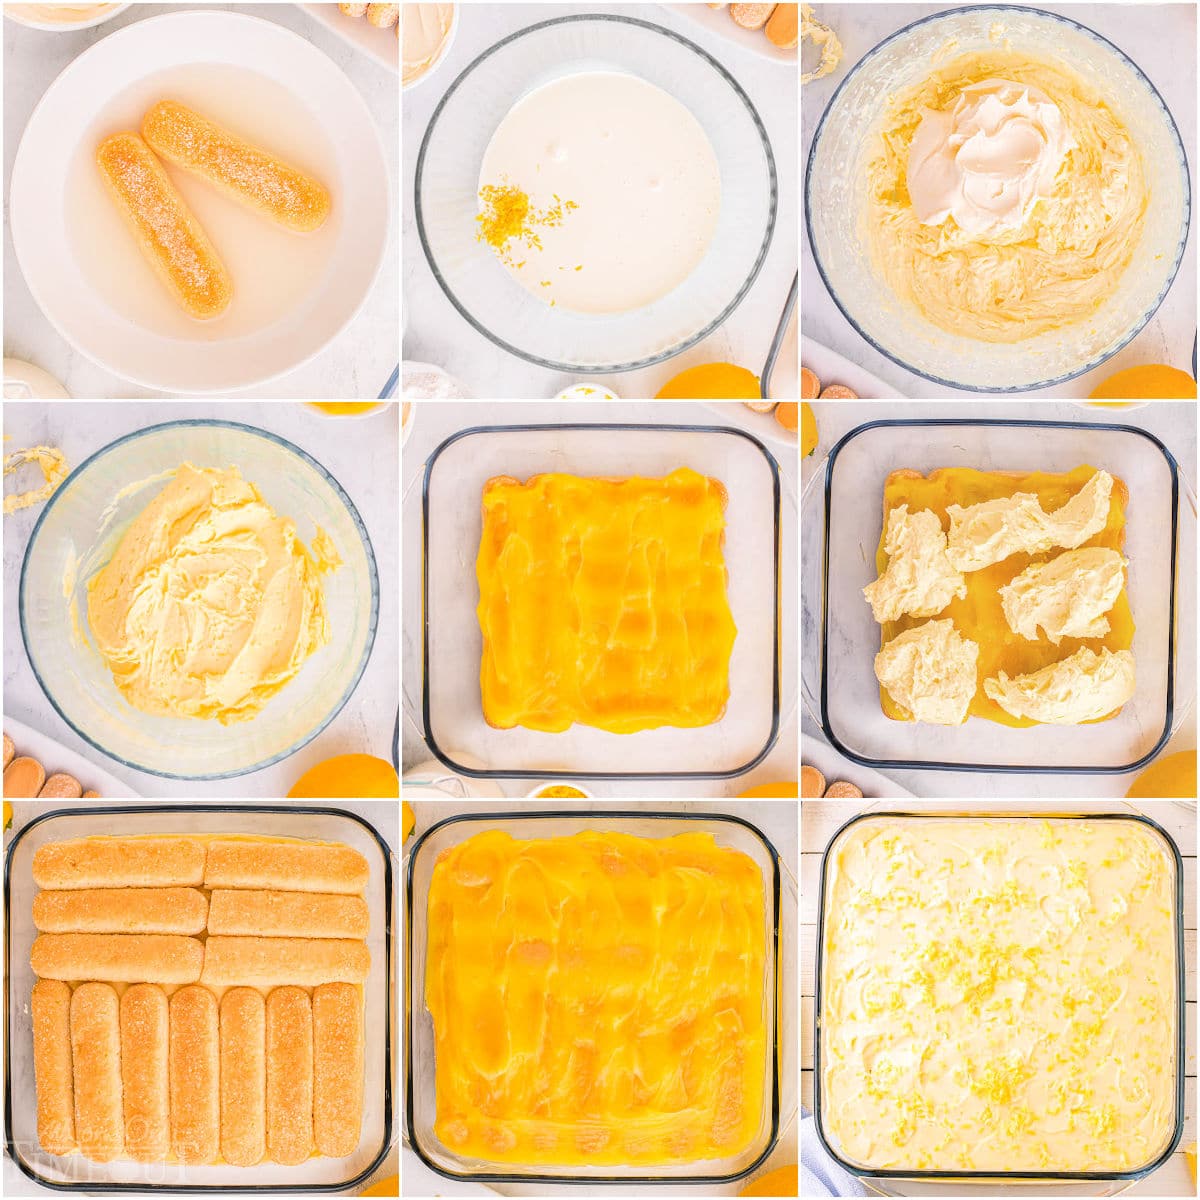 nine image collage showing step by step how to make and assemble the lemon tiramisu dessert.